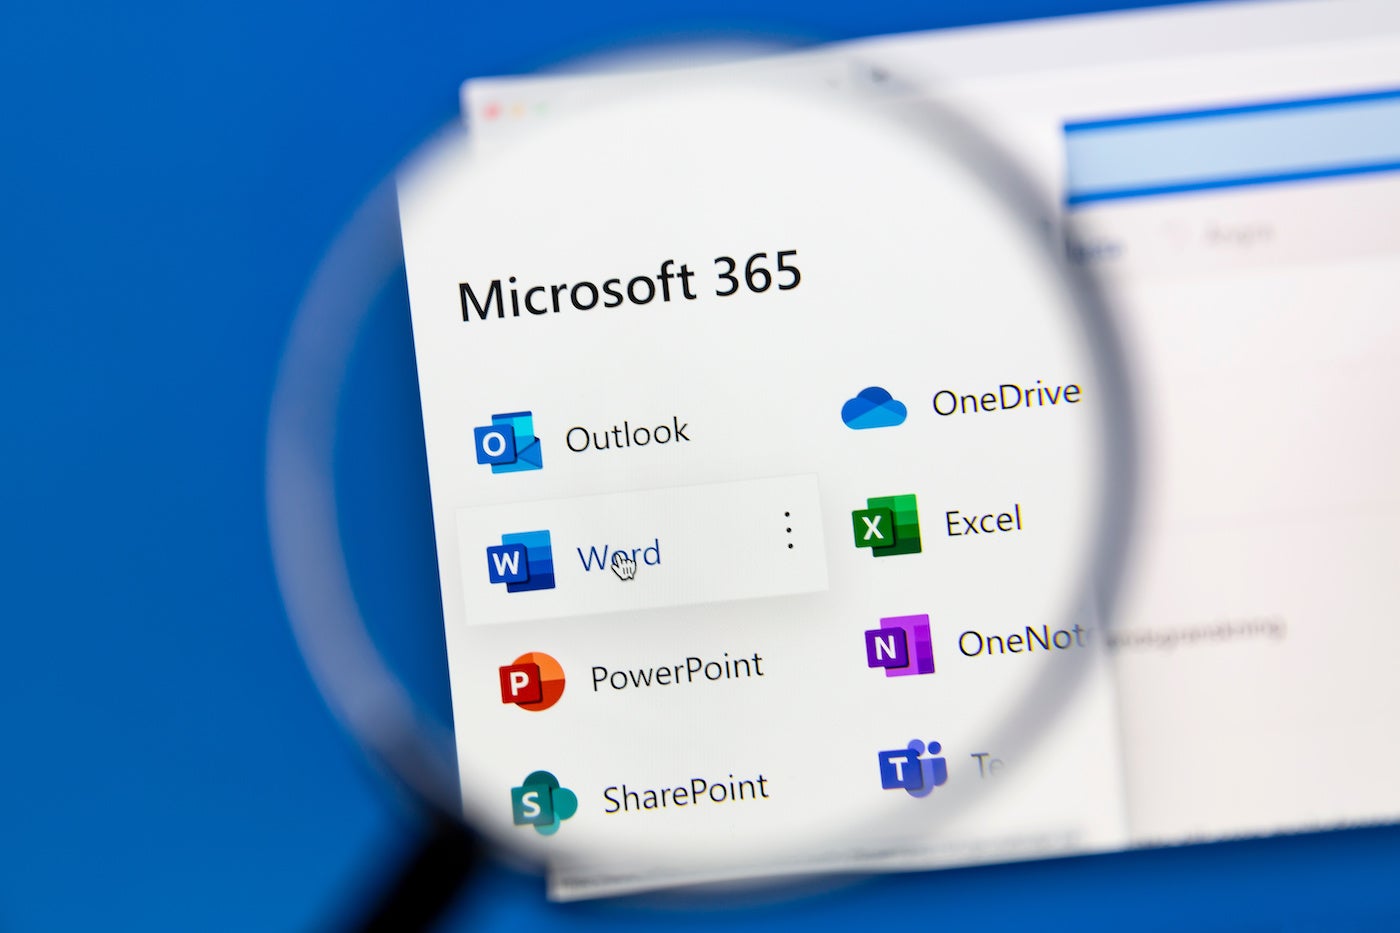 Microsoft 365 running on Windows with a magnifying glass looking closer.